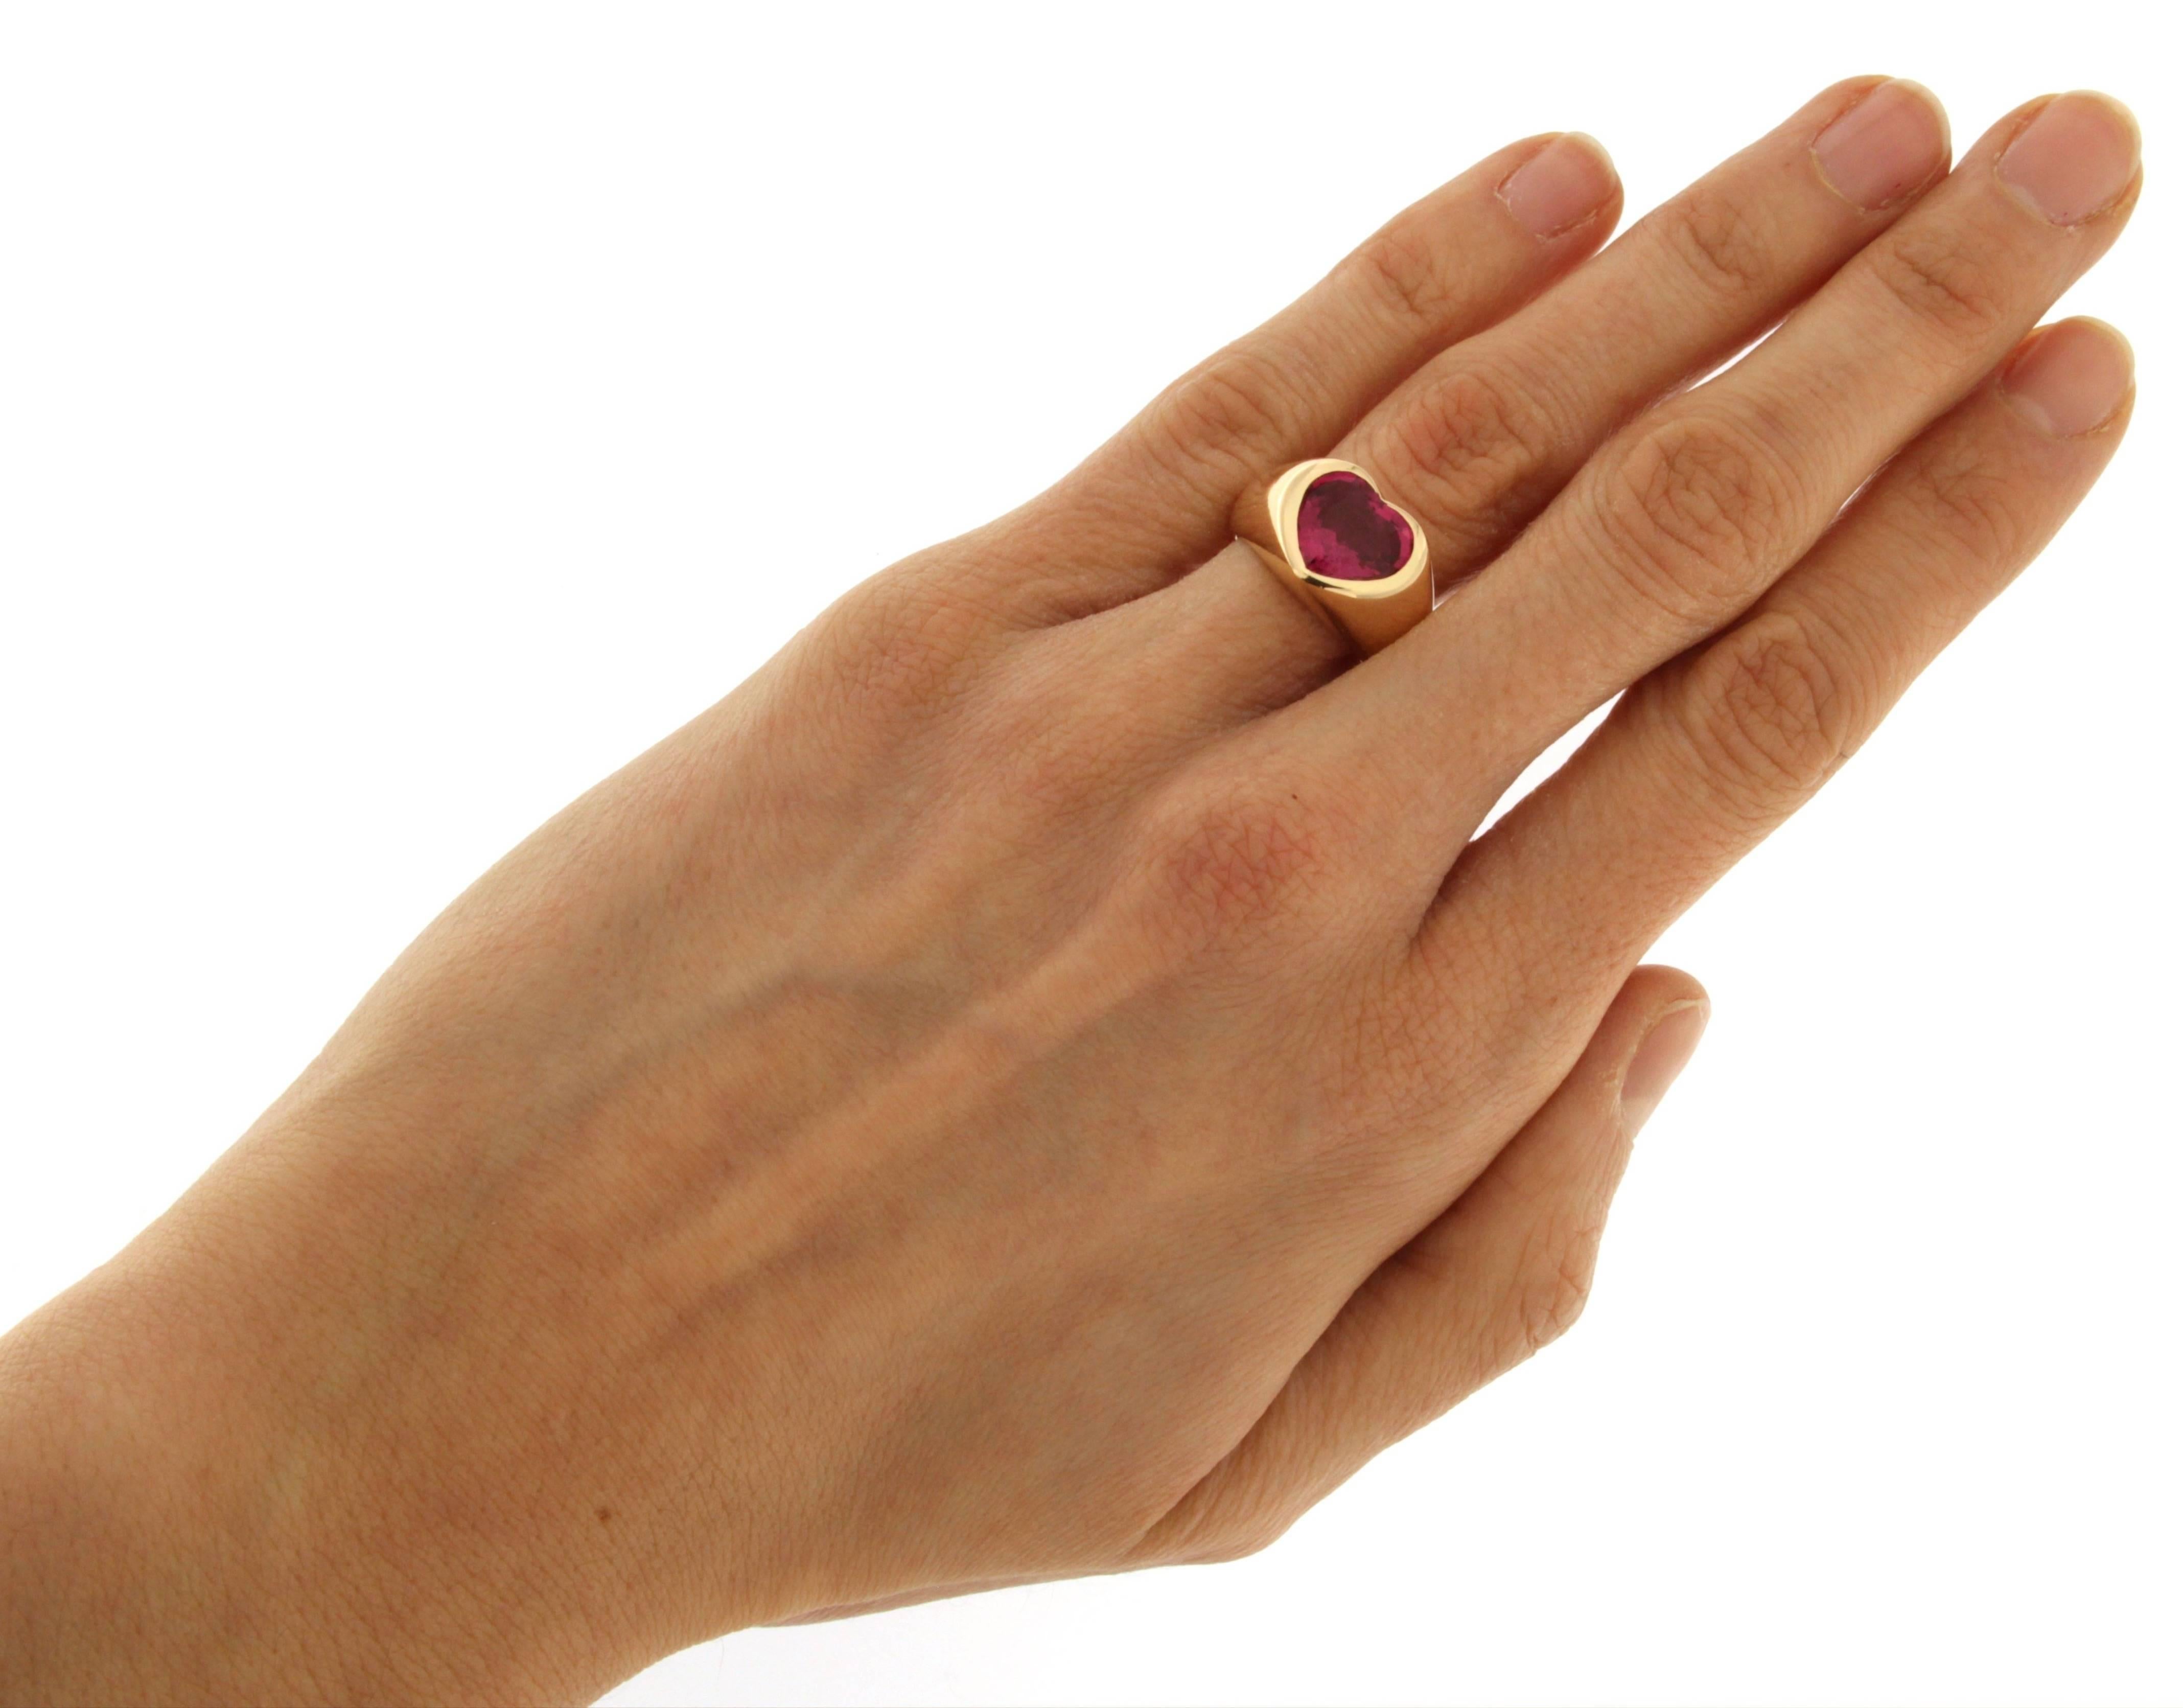 Jona design collection, hand crafted in Italy, stunning 18 karat yellow gold signet ring set with a heart cut intense red Rubellite Tourmaline weighing 3.63 carats.
US size 6, can be sized to any specification.
All Jona jewelry is new and has never